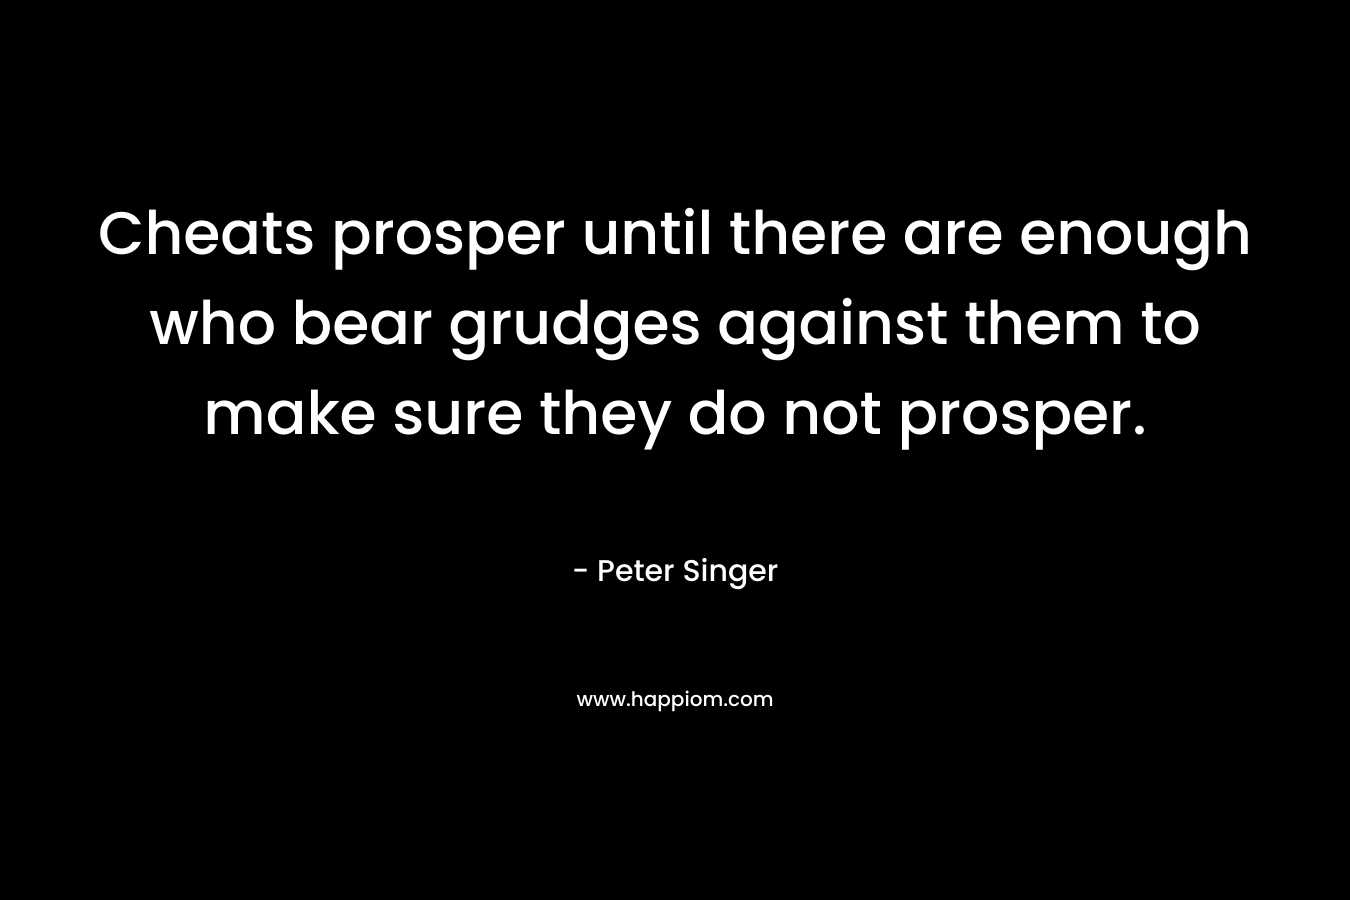 Cheats prosper until there are enough who bear grudges against them to make sure they do not prosper. – Peter Singer